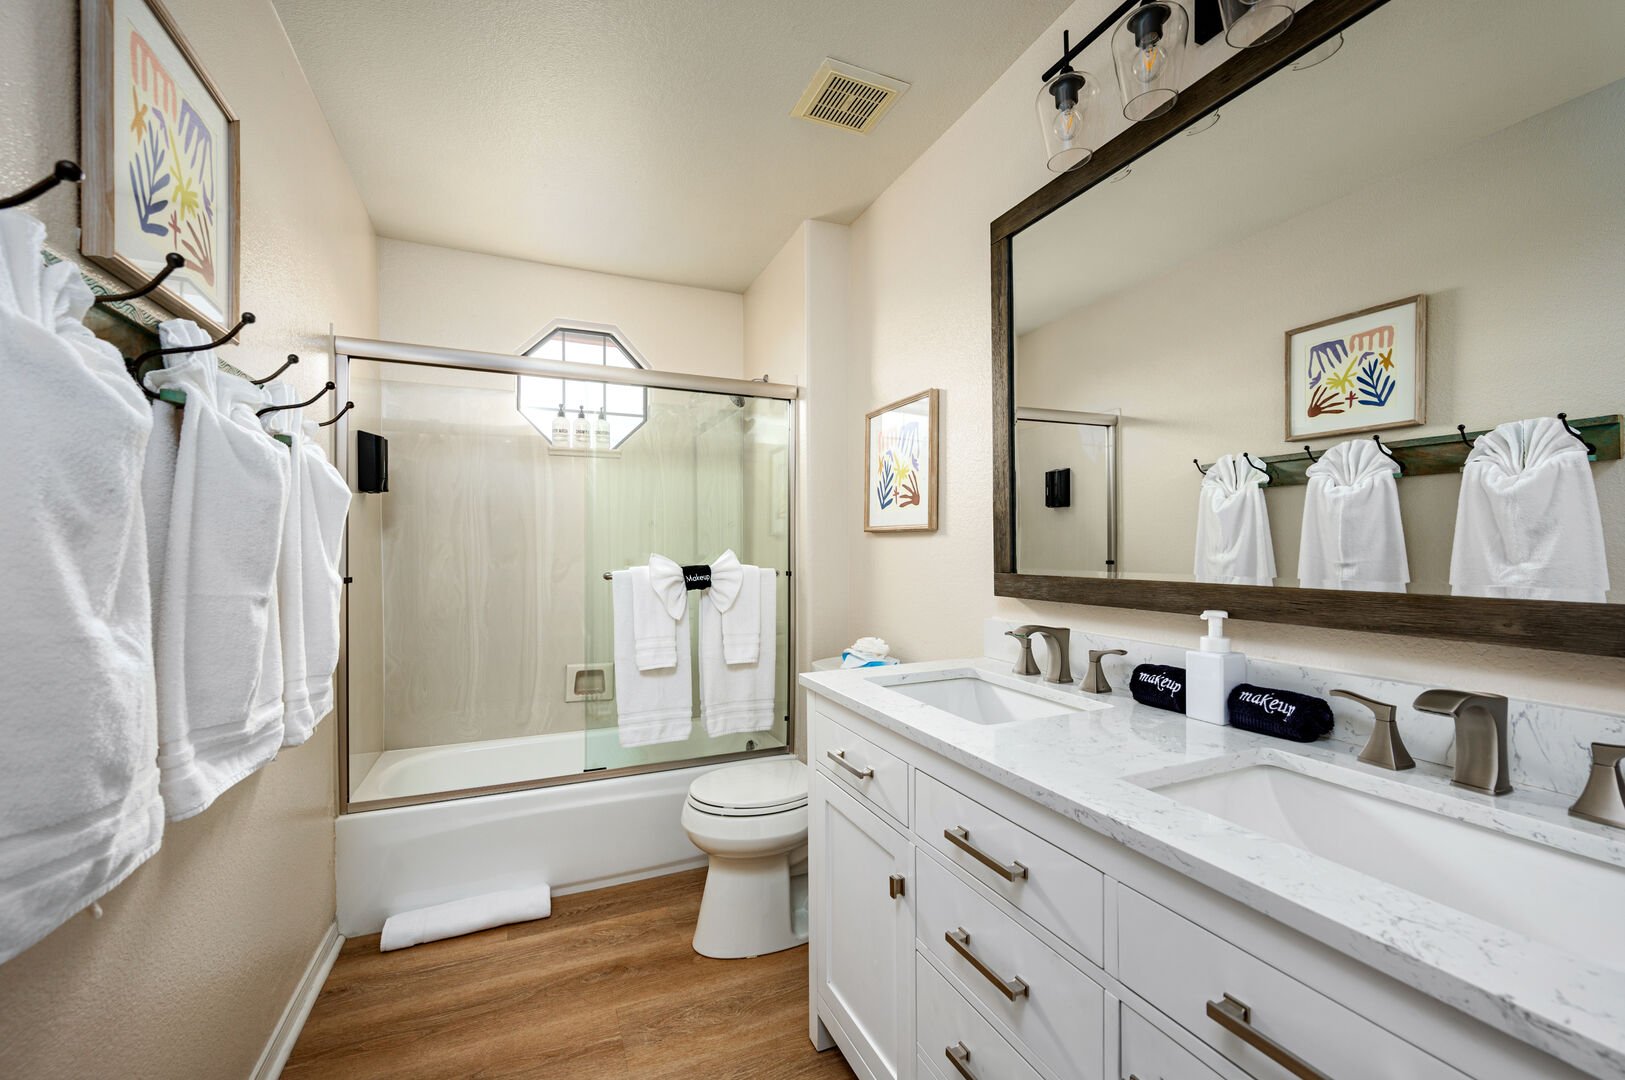 Hall bathroom with double sinks and combo shower tub.